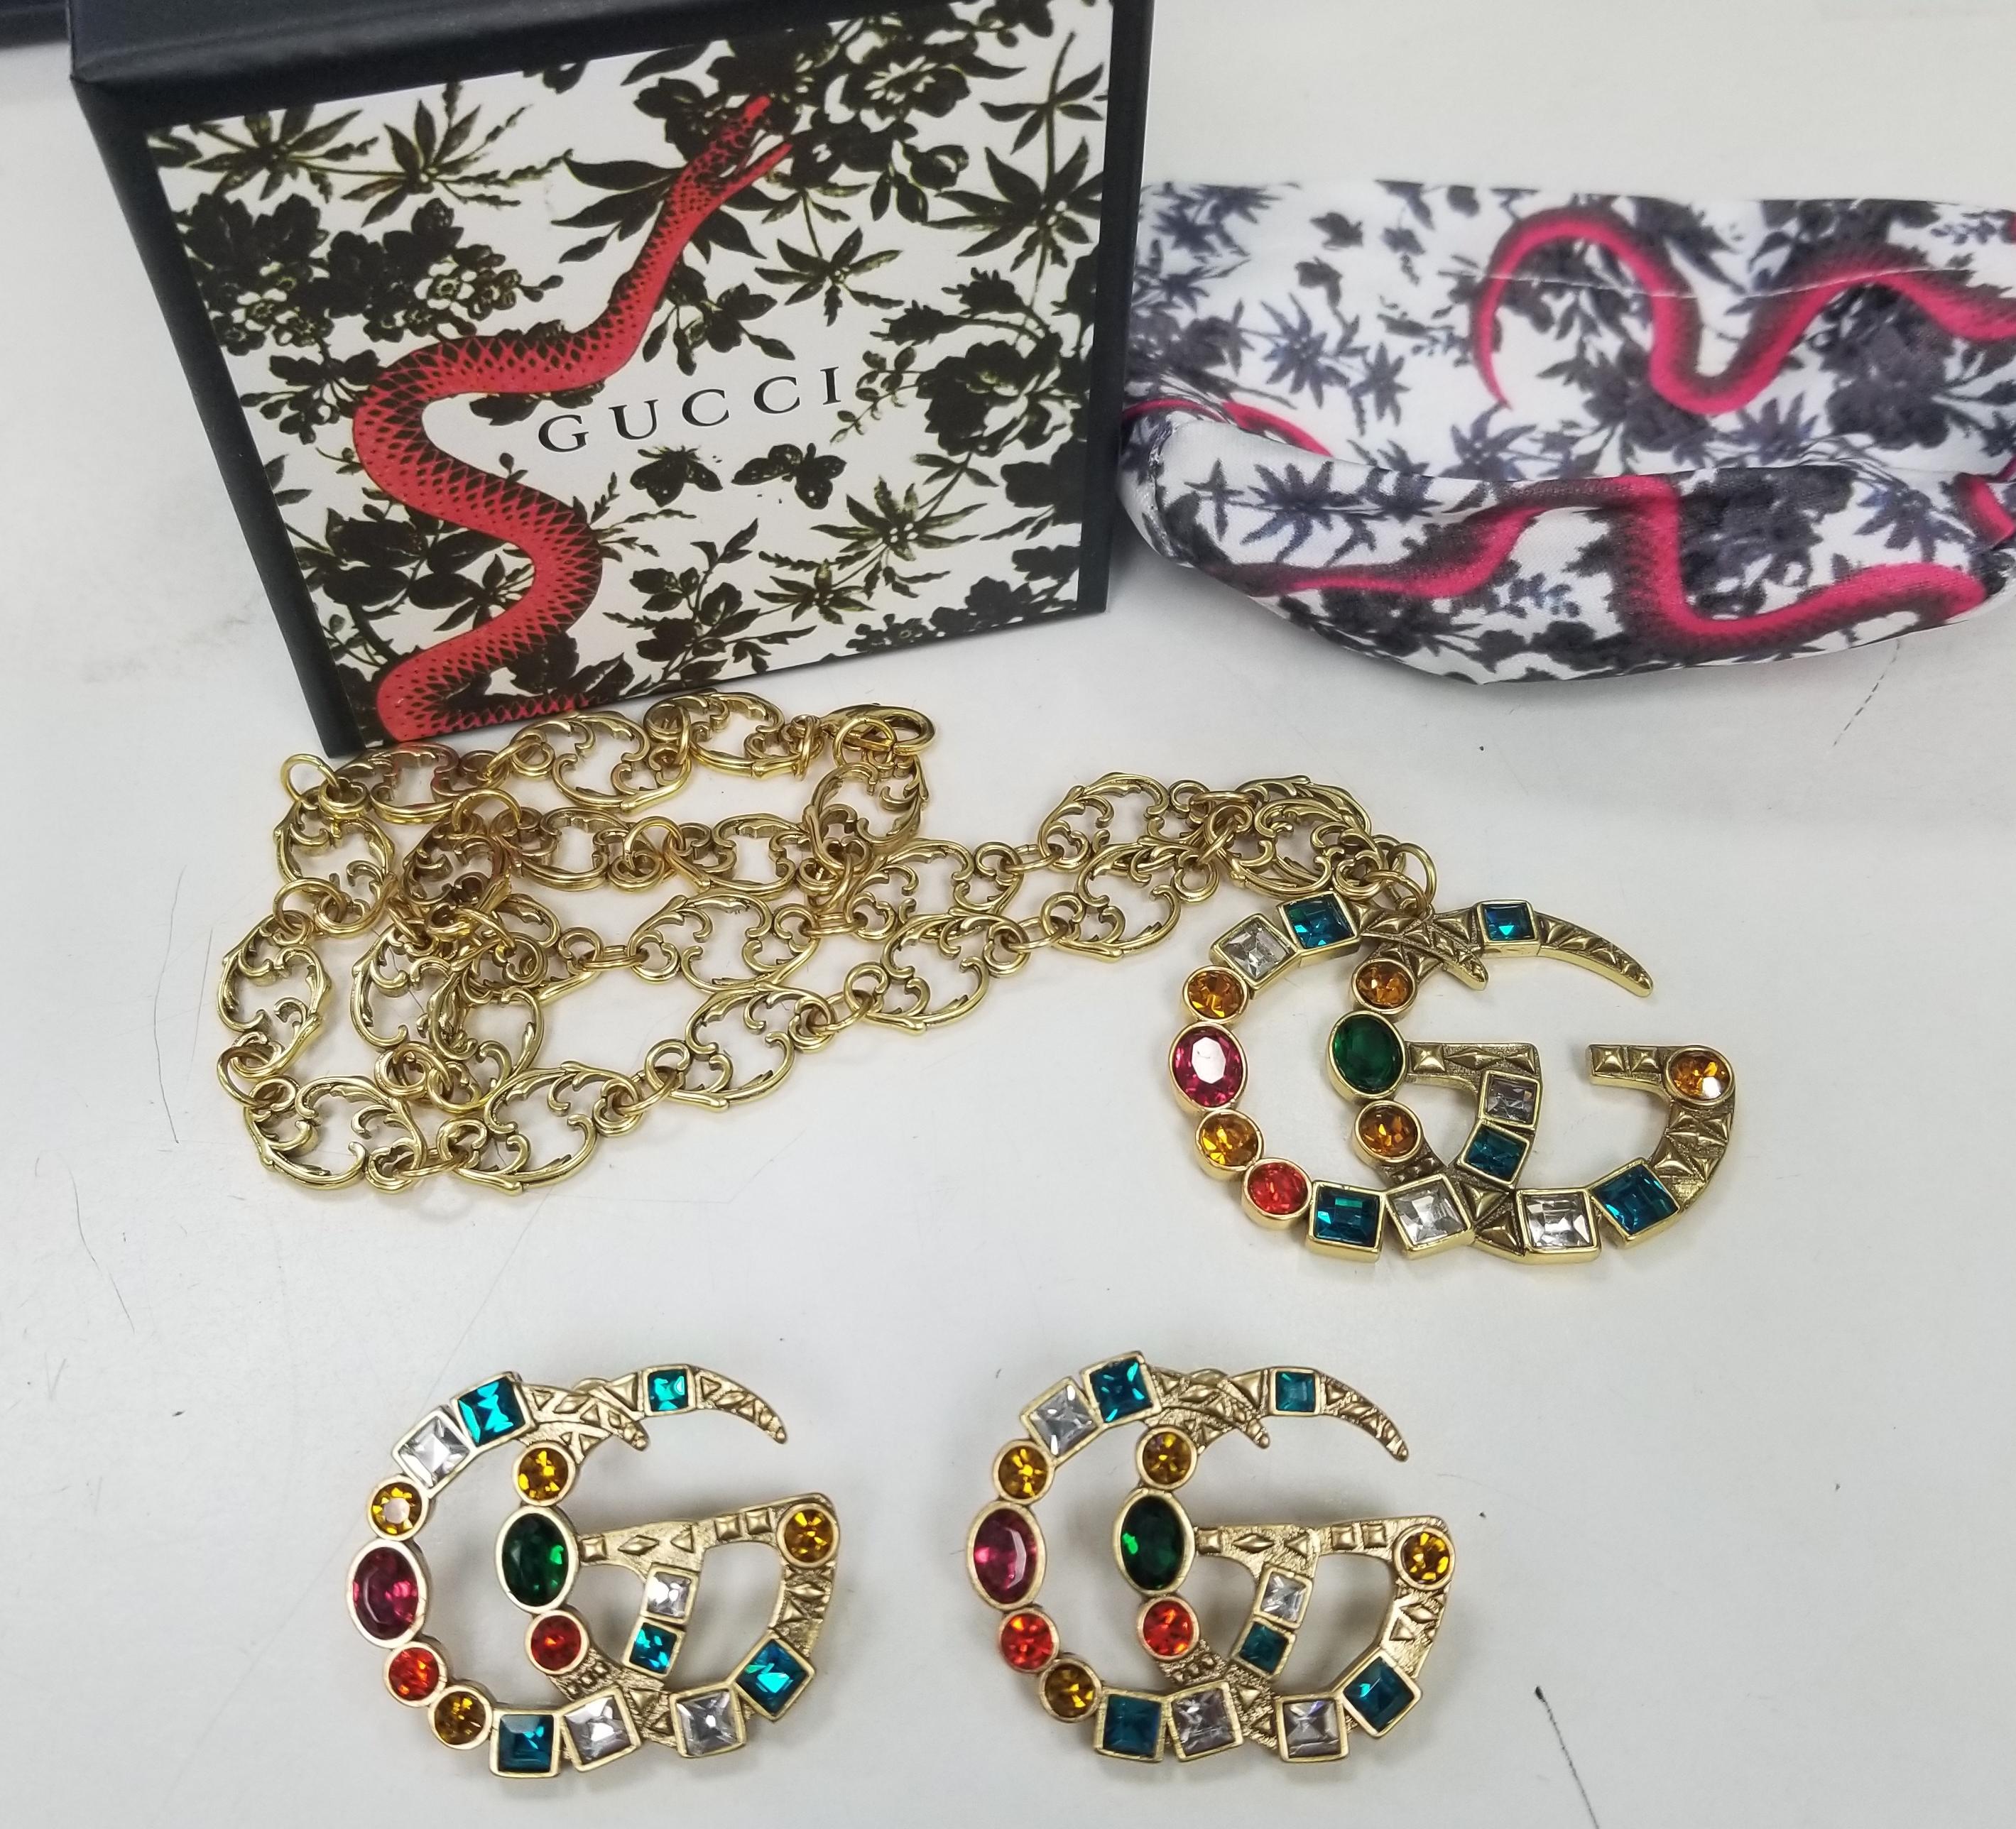 Gucci Necklace, Bracelet & Earrings Set Marmont GG Crystal And Gold Plated
Gucci Necklace, Bracelet & Earrings marmont gg crystal and gold plated. Multicolor crystals. Good condition. GG : 8 cm x 10 cm Length : 48cm
Gold & Multi Colored Crystal